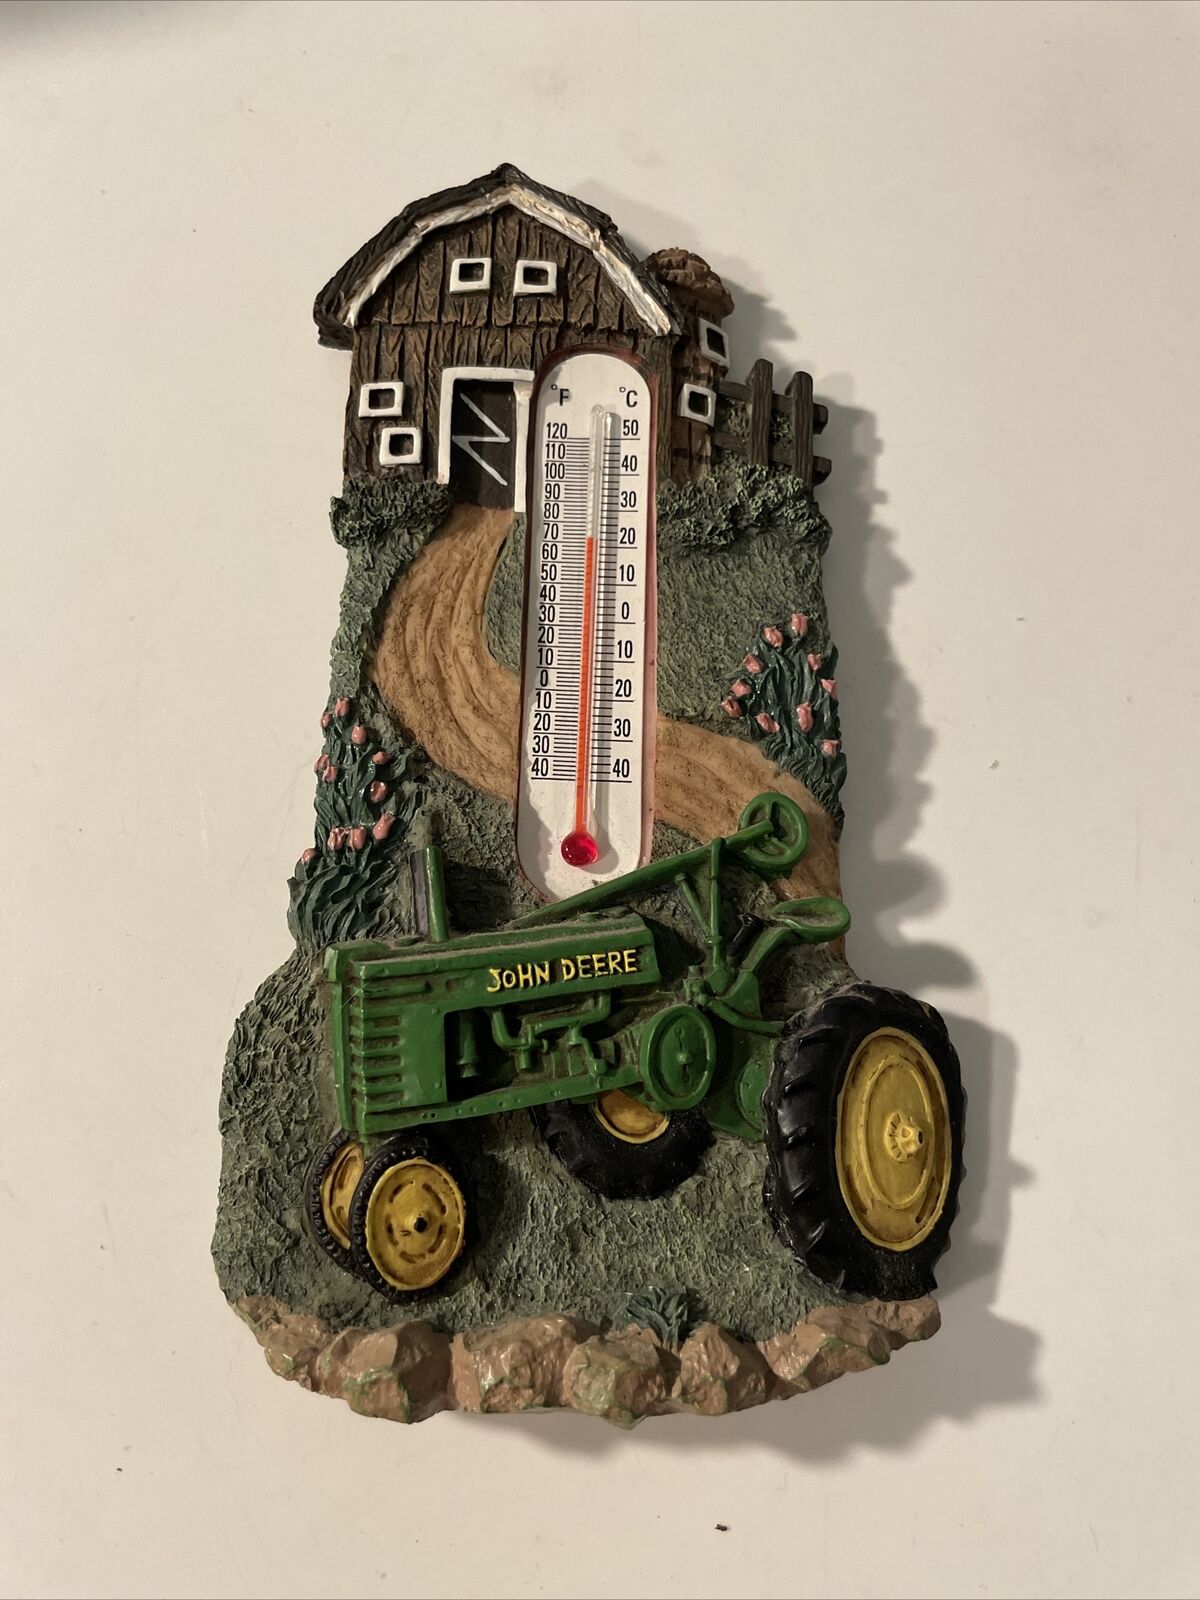 john deere resin thermometer Tractor Barn Wall Hanging